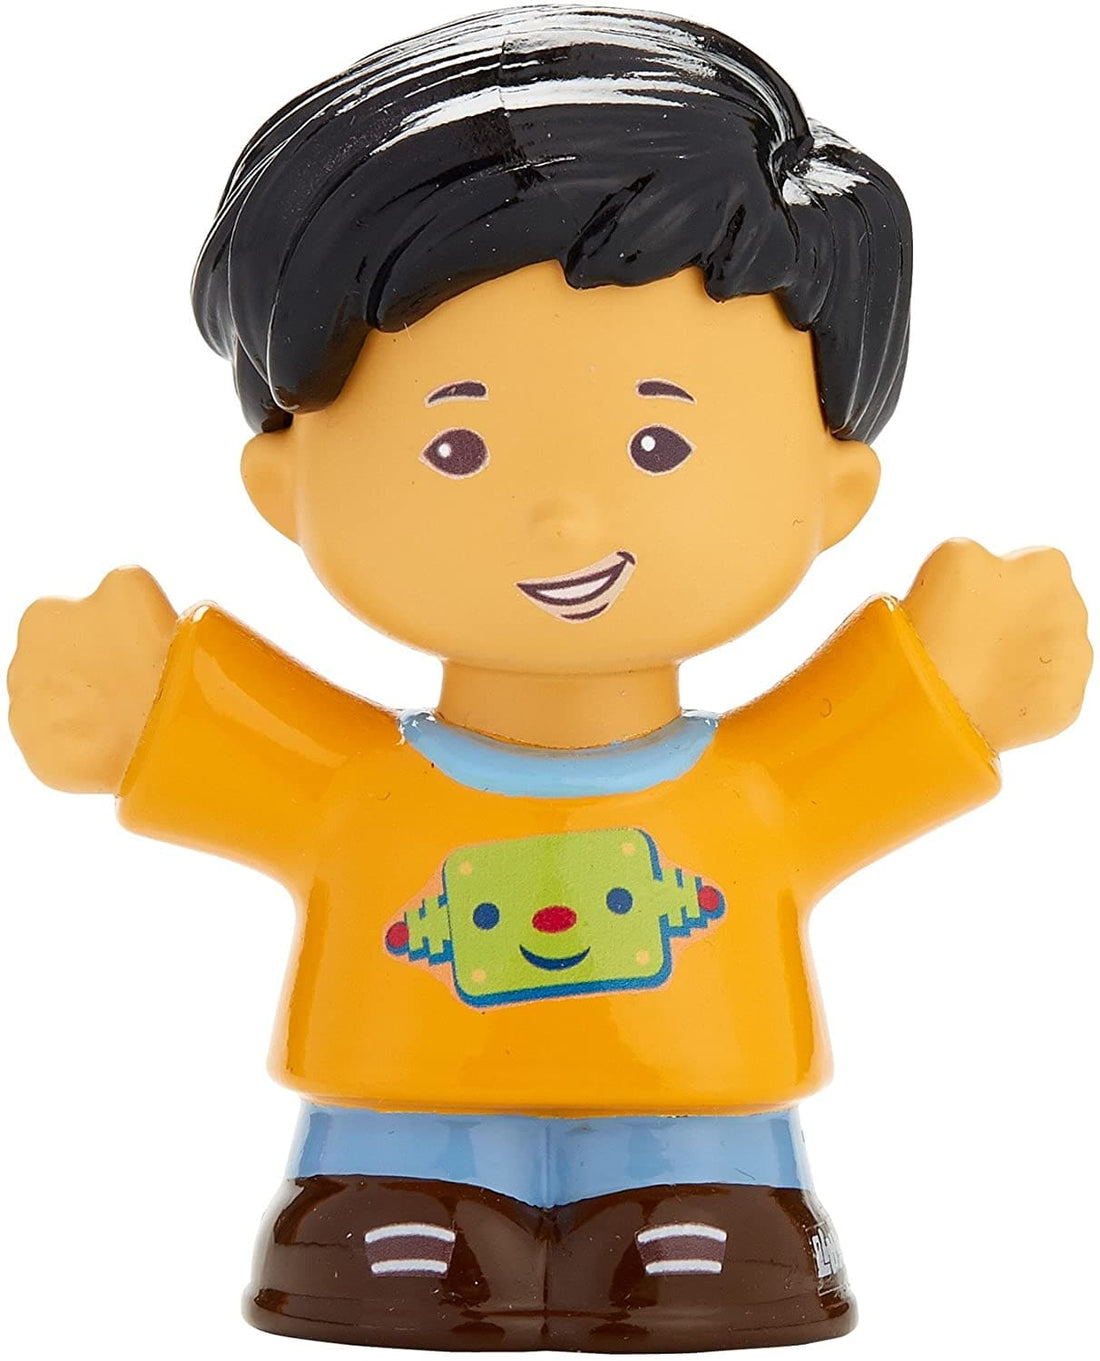 Fisher Price Little People: Koby - best price from Maltashopper.com FGM57